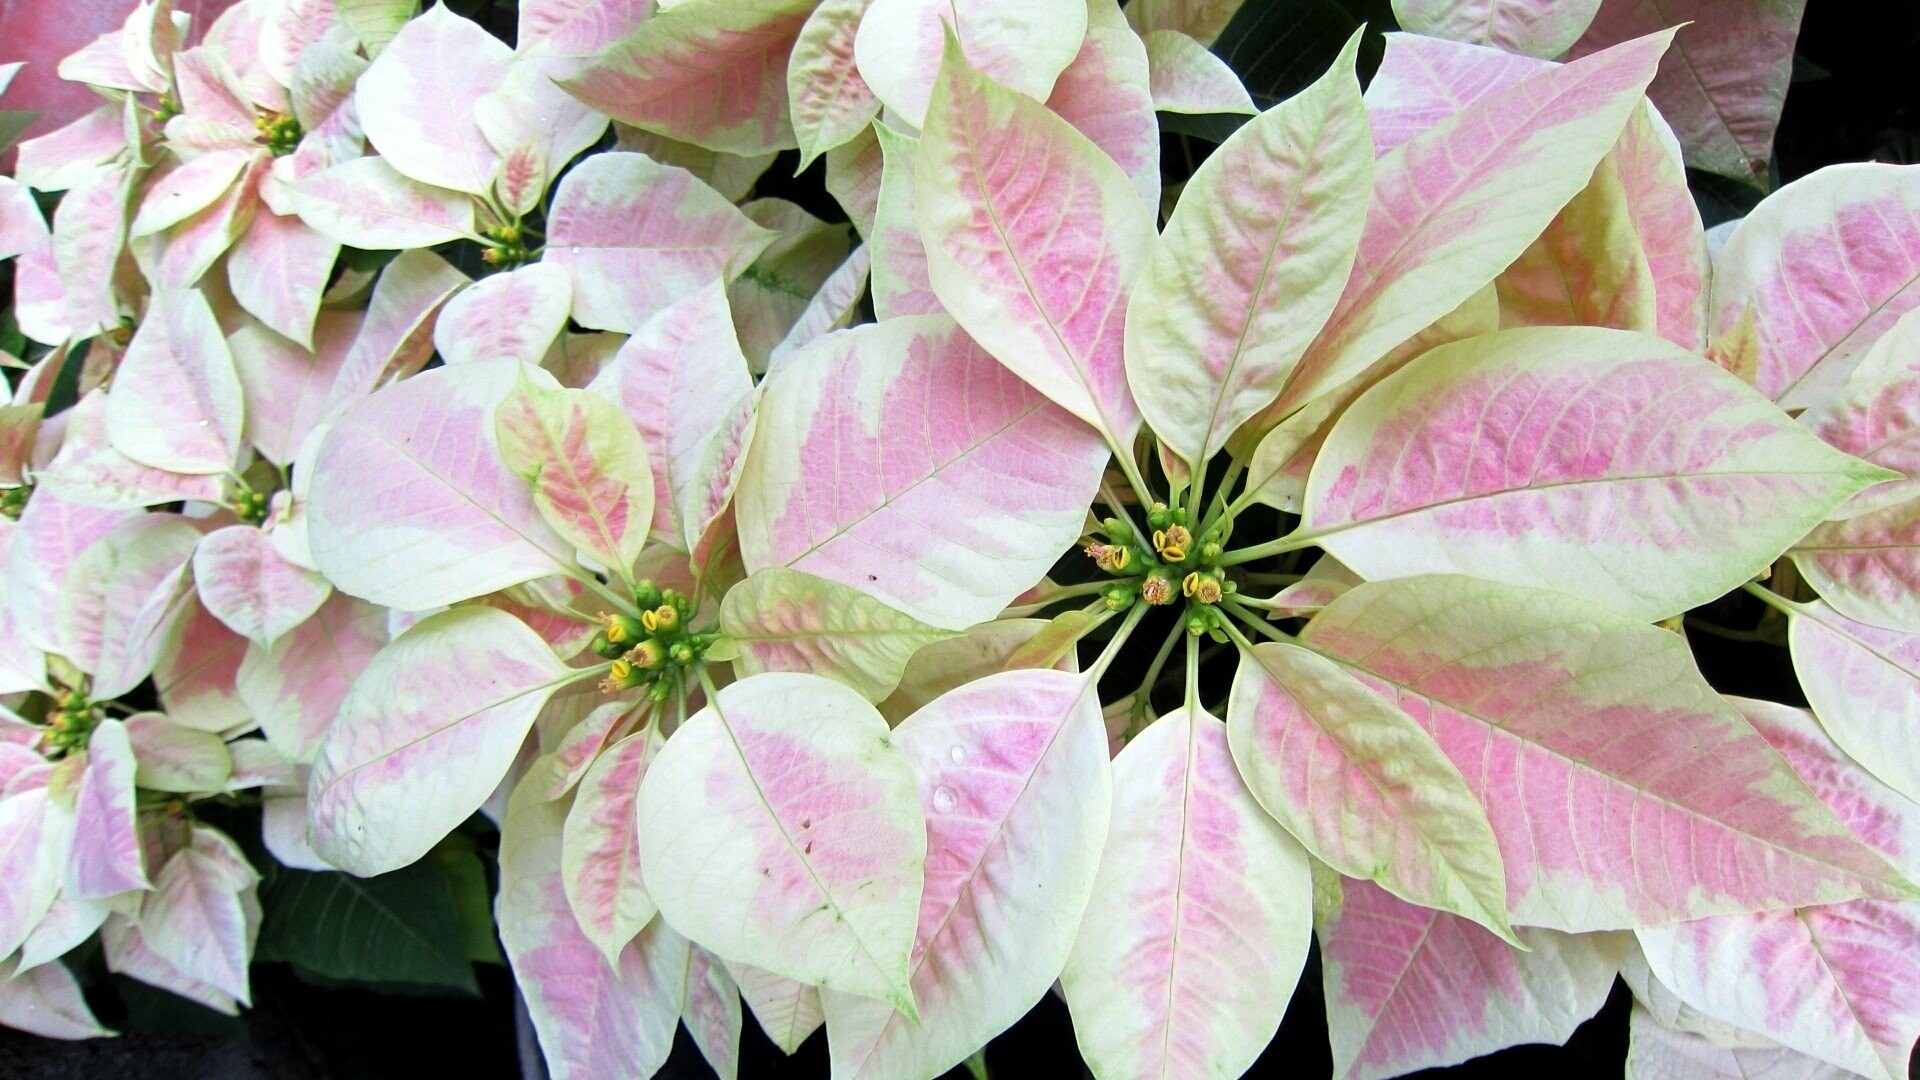 Poinsettia: The Paul Ecke Ranch in California does about 50% of the worldwide sales of Poinsettias. 1920x1080 Full HD Wallpaper.